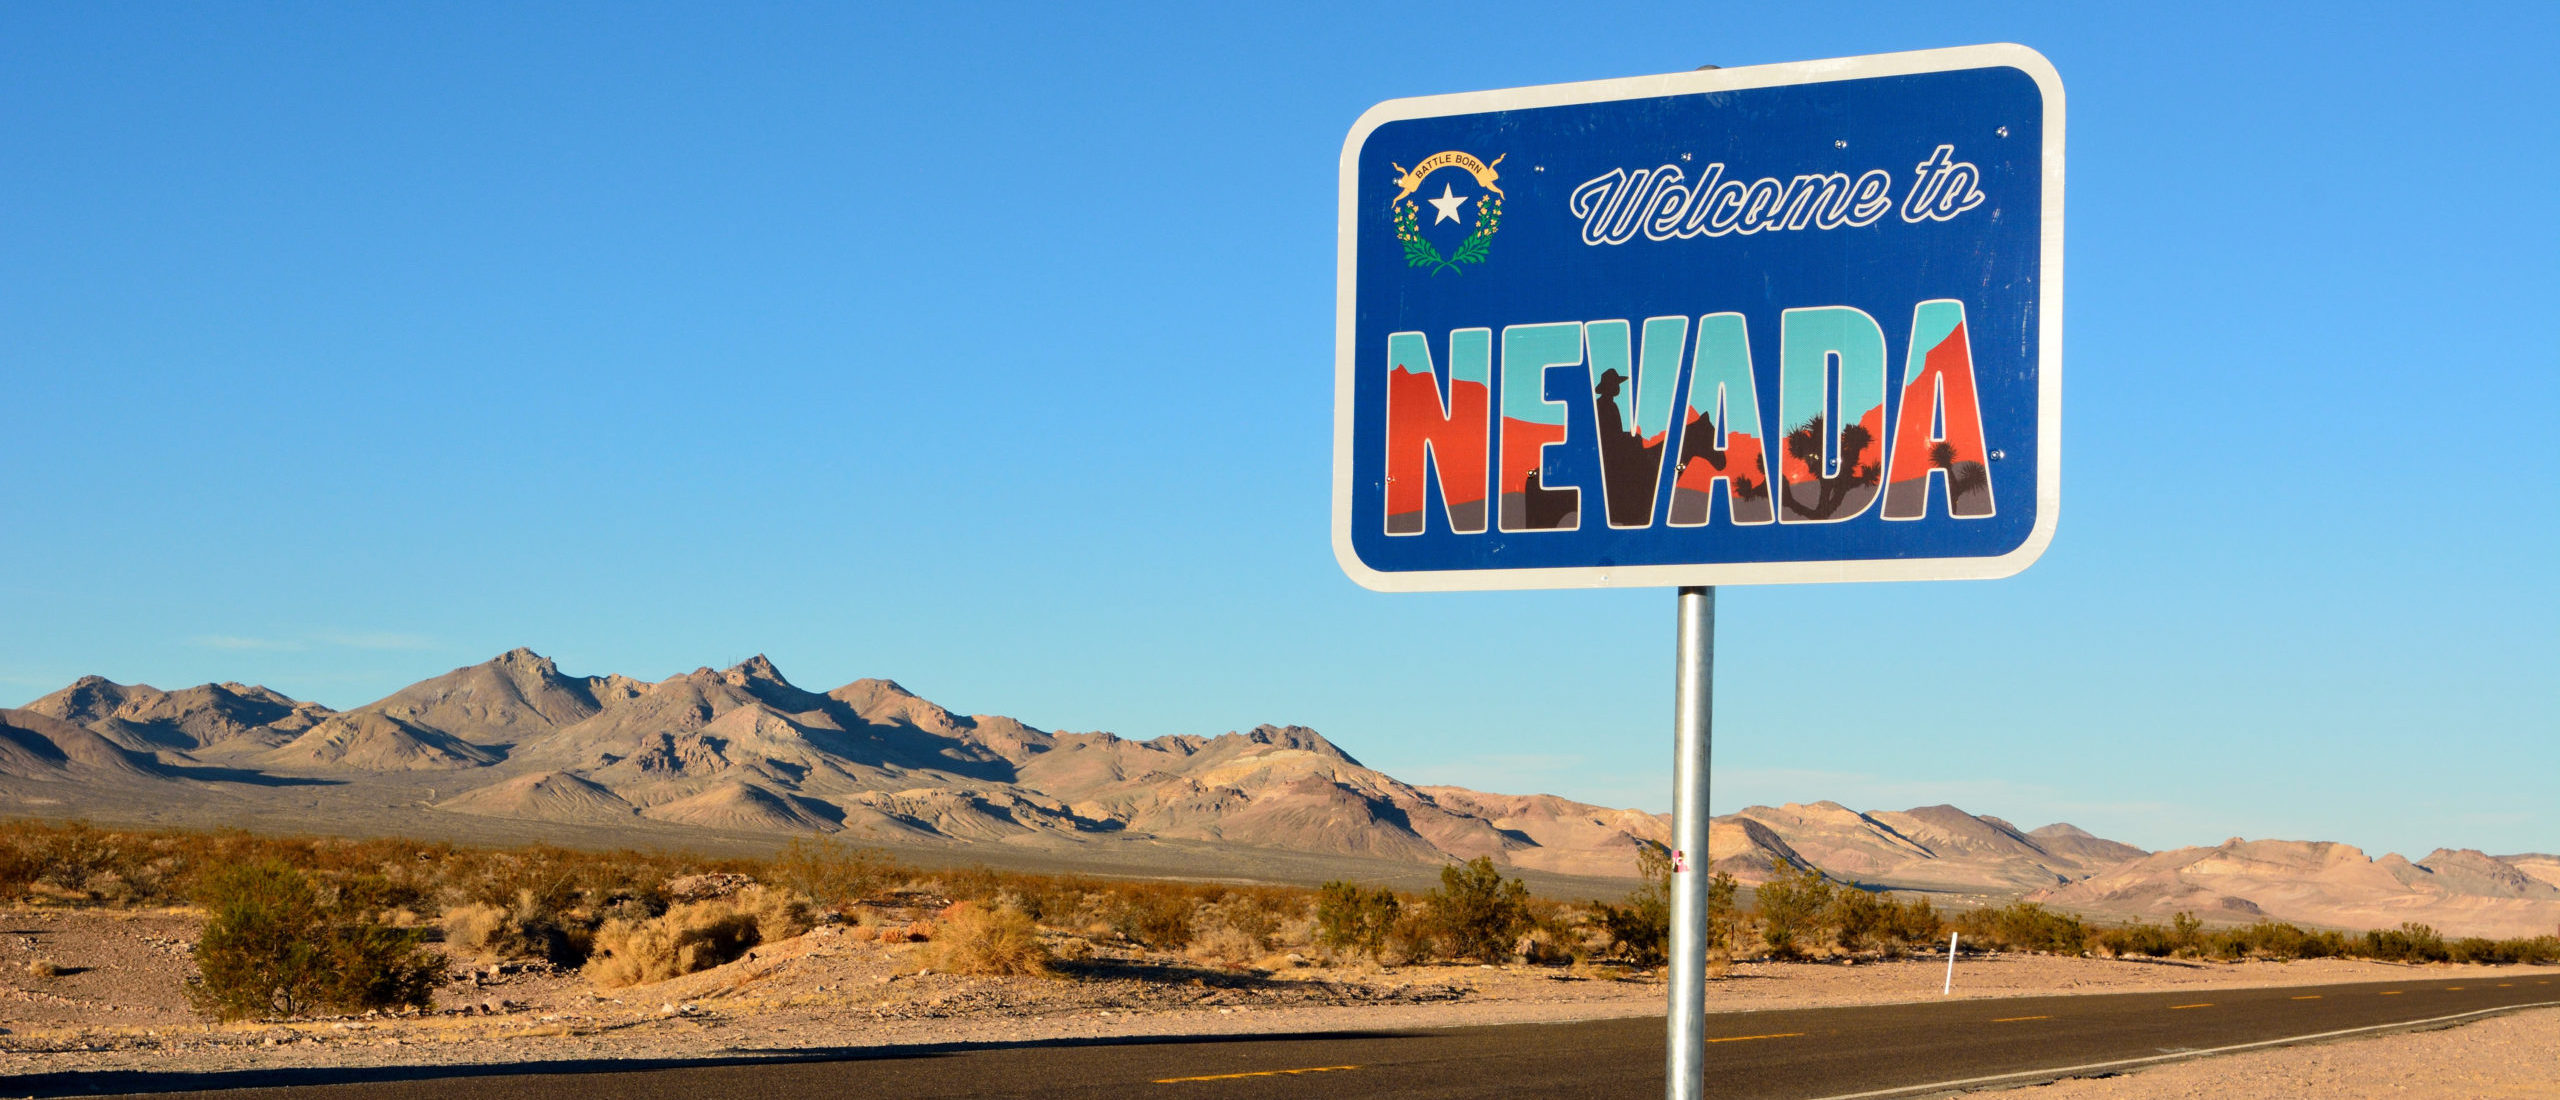 Guys, There’s A Whole Separate Nation Inside Nevada, And It Sounds Pretty Wild